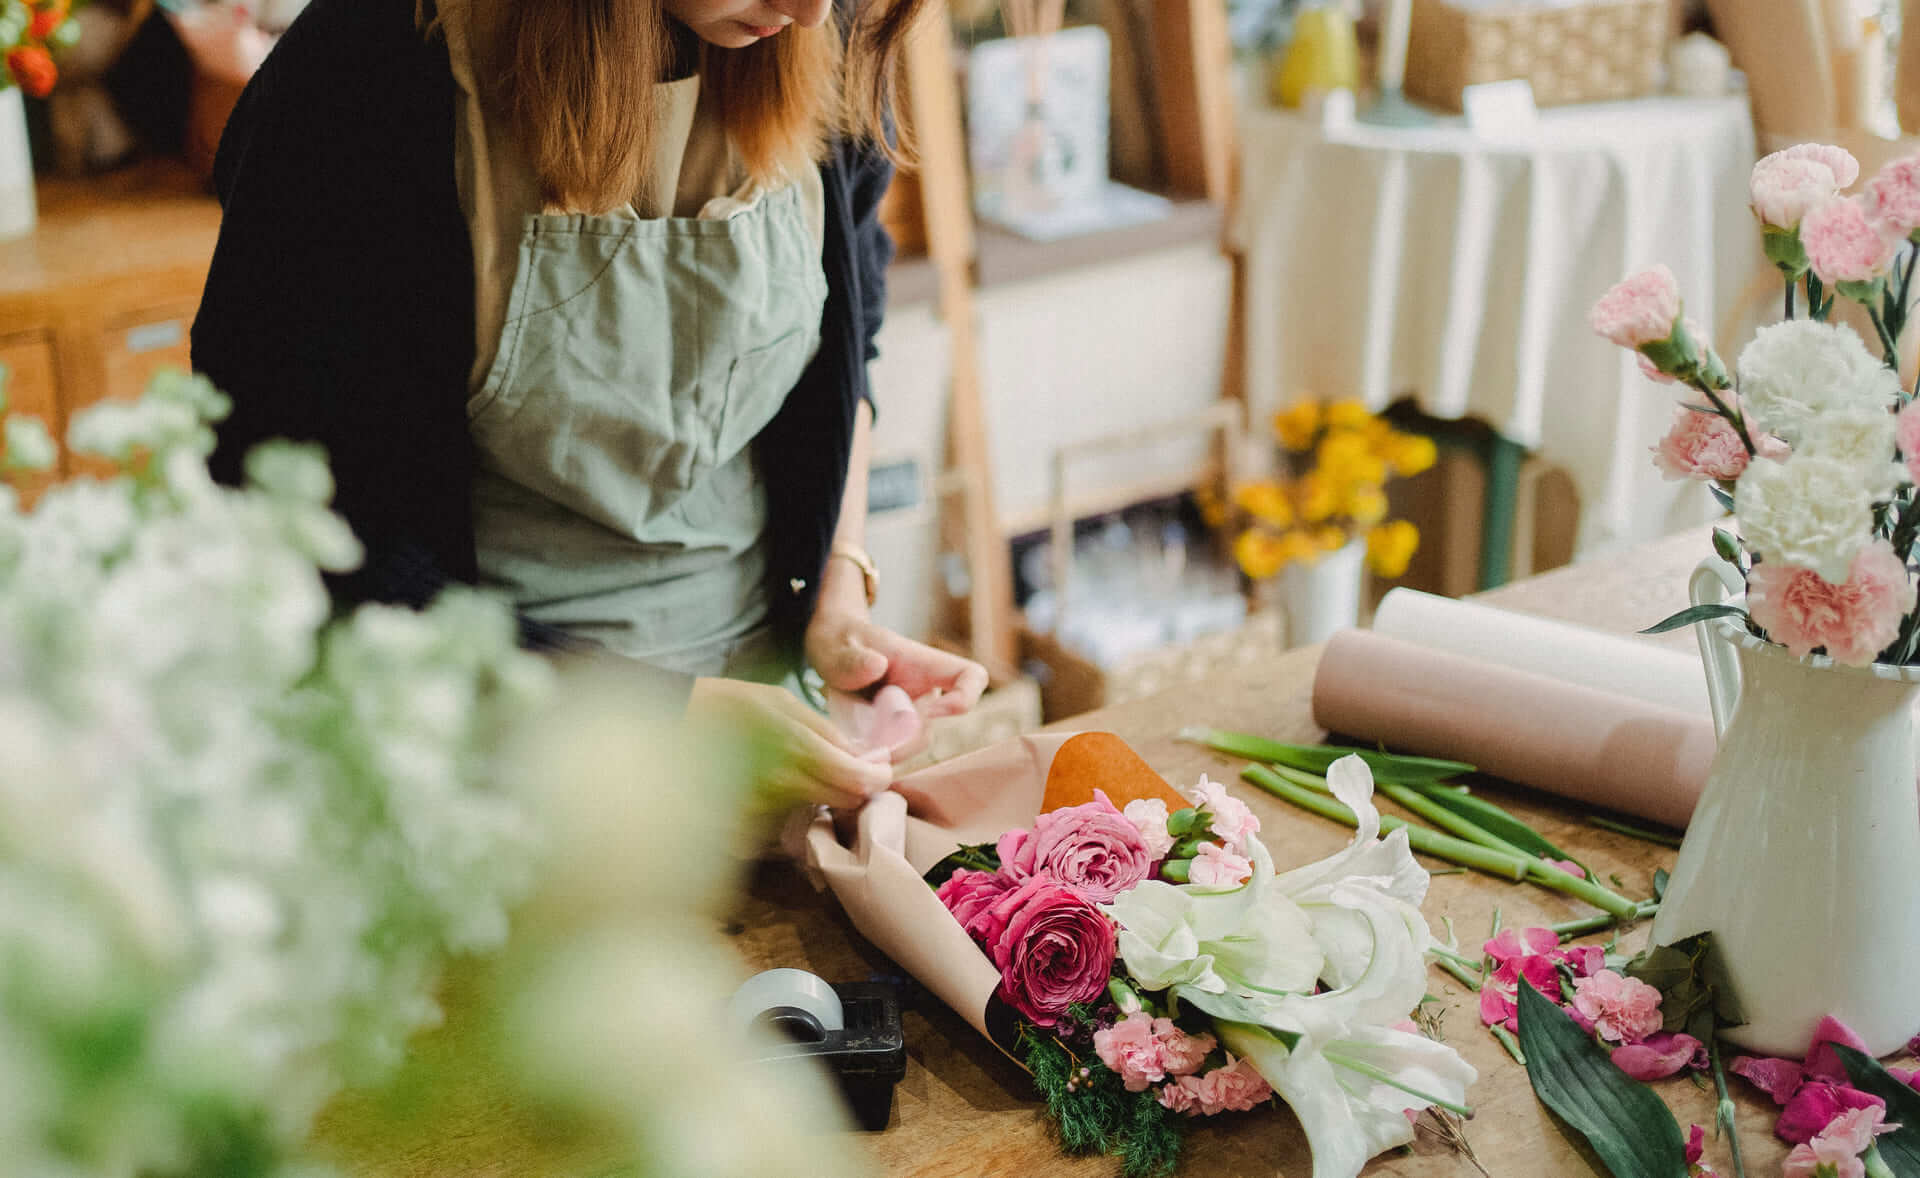 4 Easy Ways to Choose the Best Online Florist in Singapore